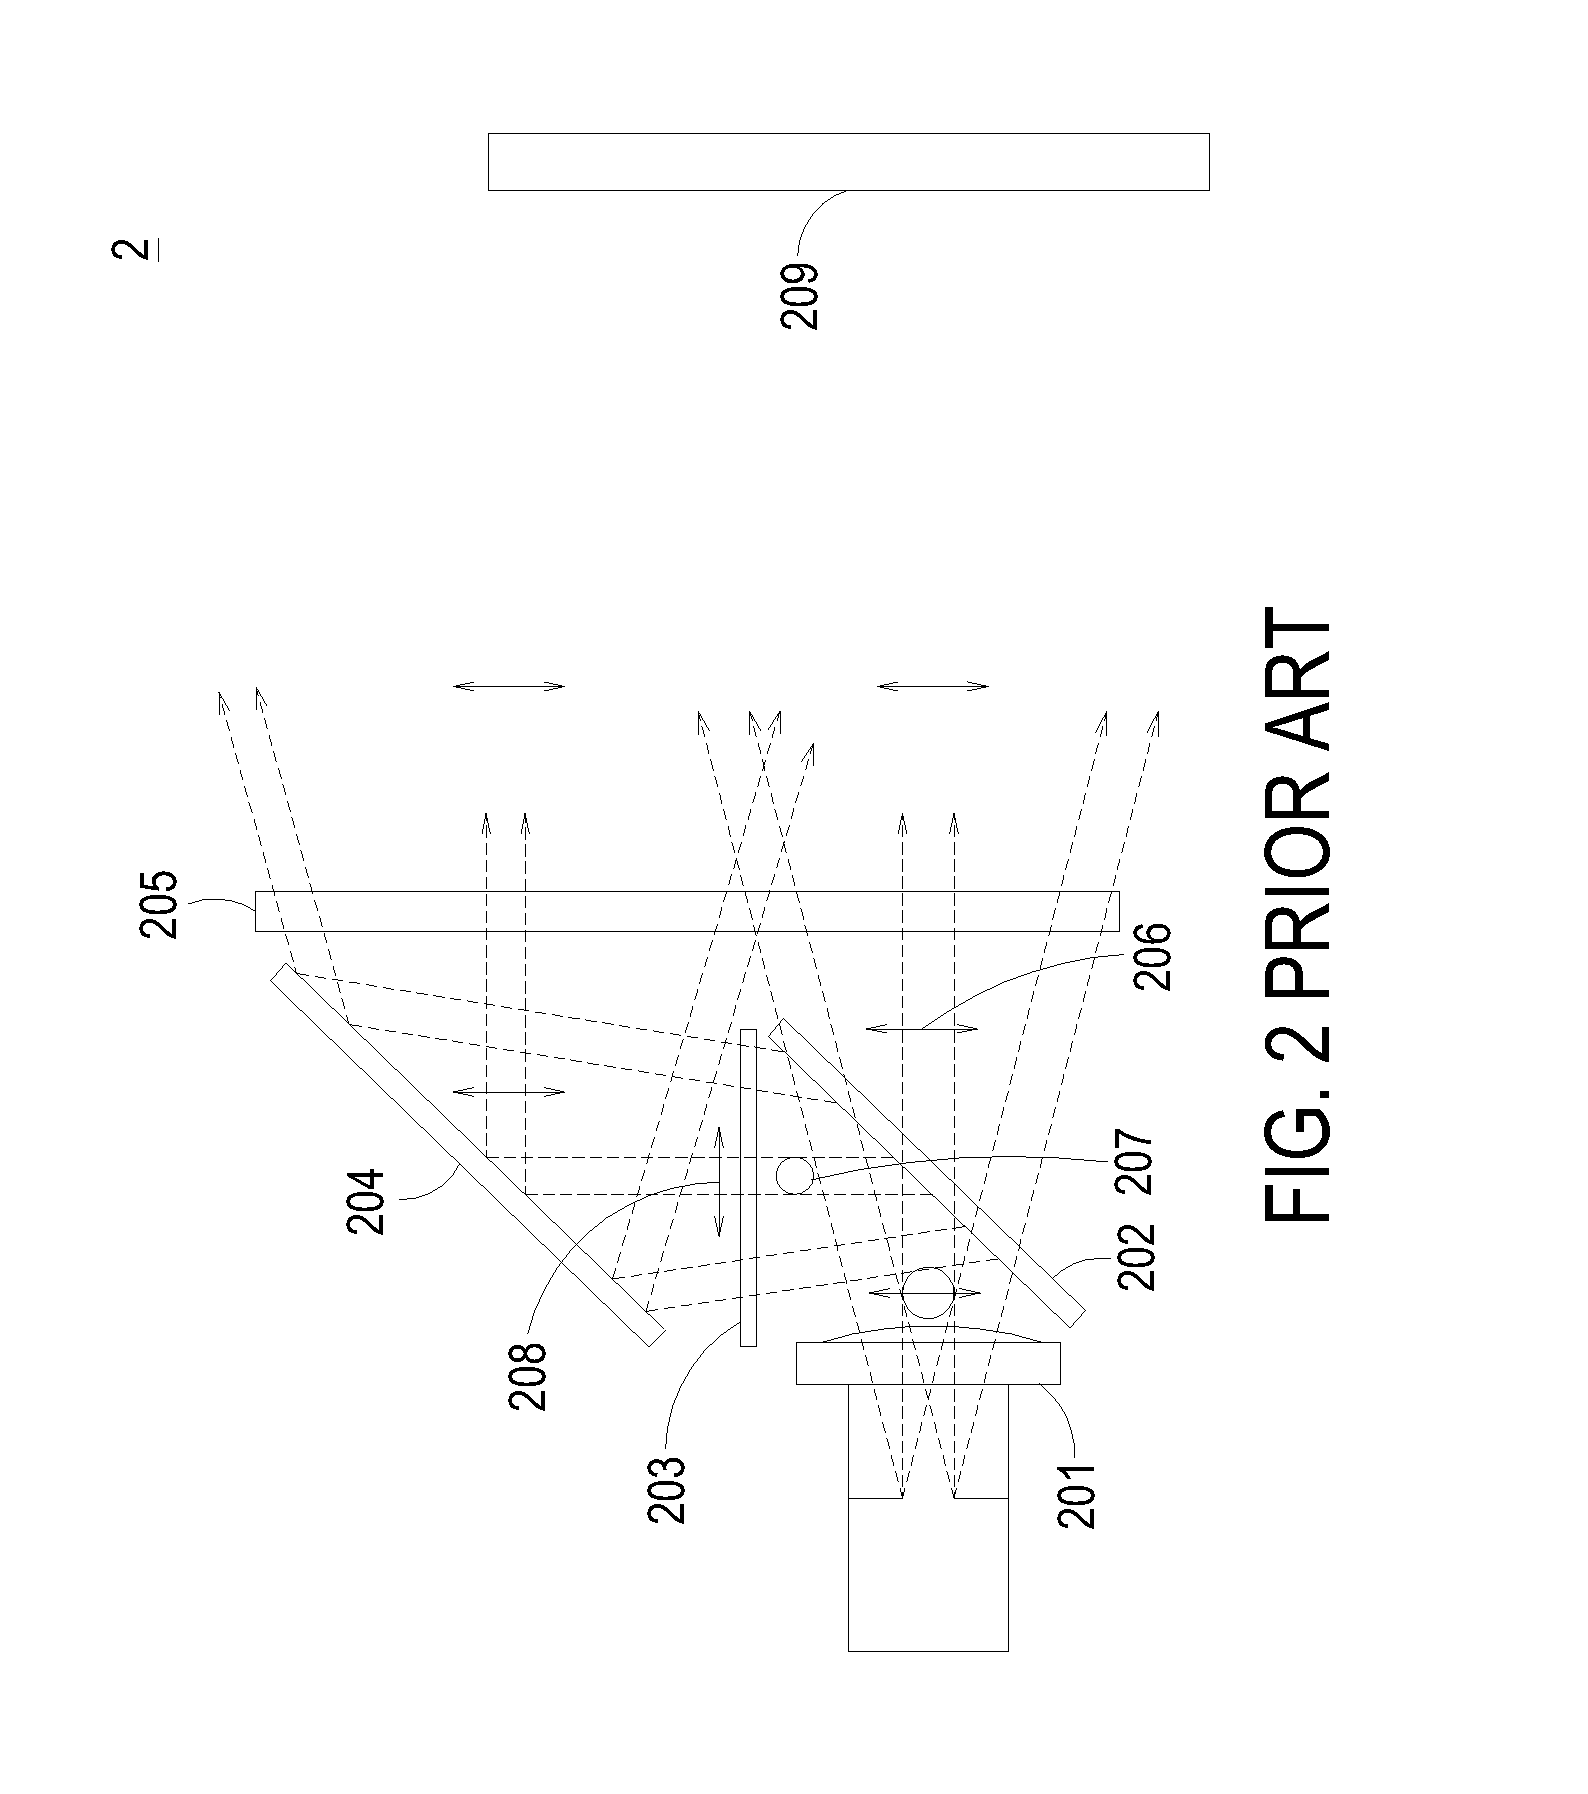 Polarization conversion system and stereoscopic projection system employing same